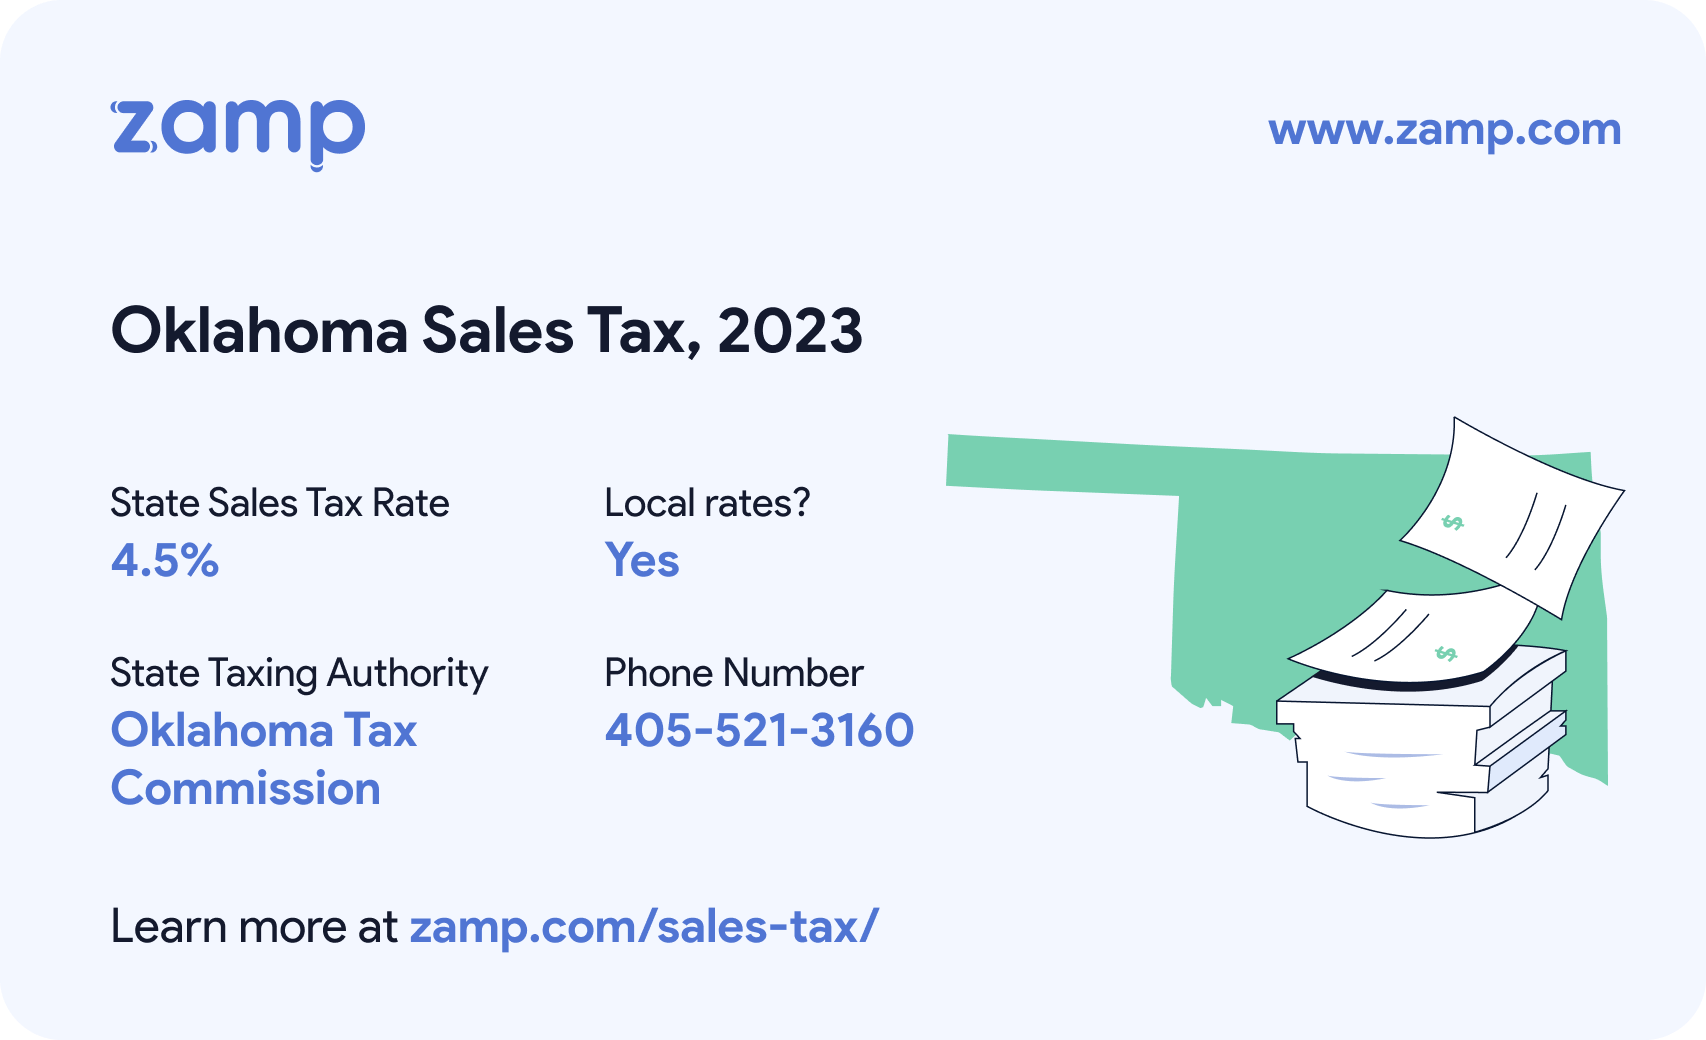 Oklahoma basic sales tax info for 2023 - State sales tax rate: 4.5%, Local rates? Yes; State Taxing Authority: Oklahoma Tax Commission; and phone number 405-521-3160